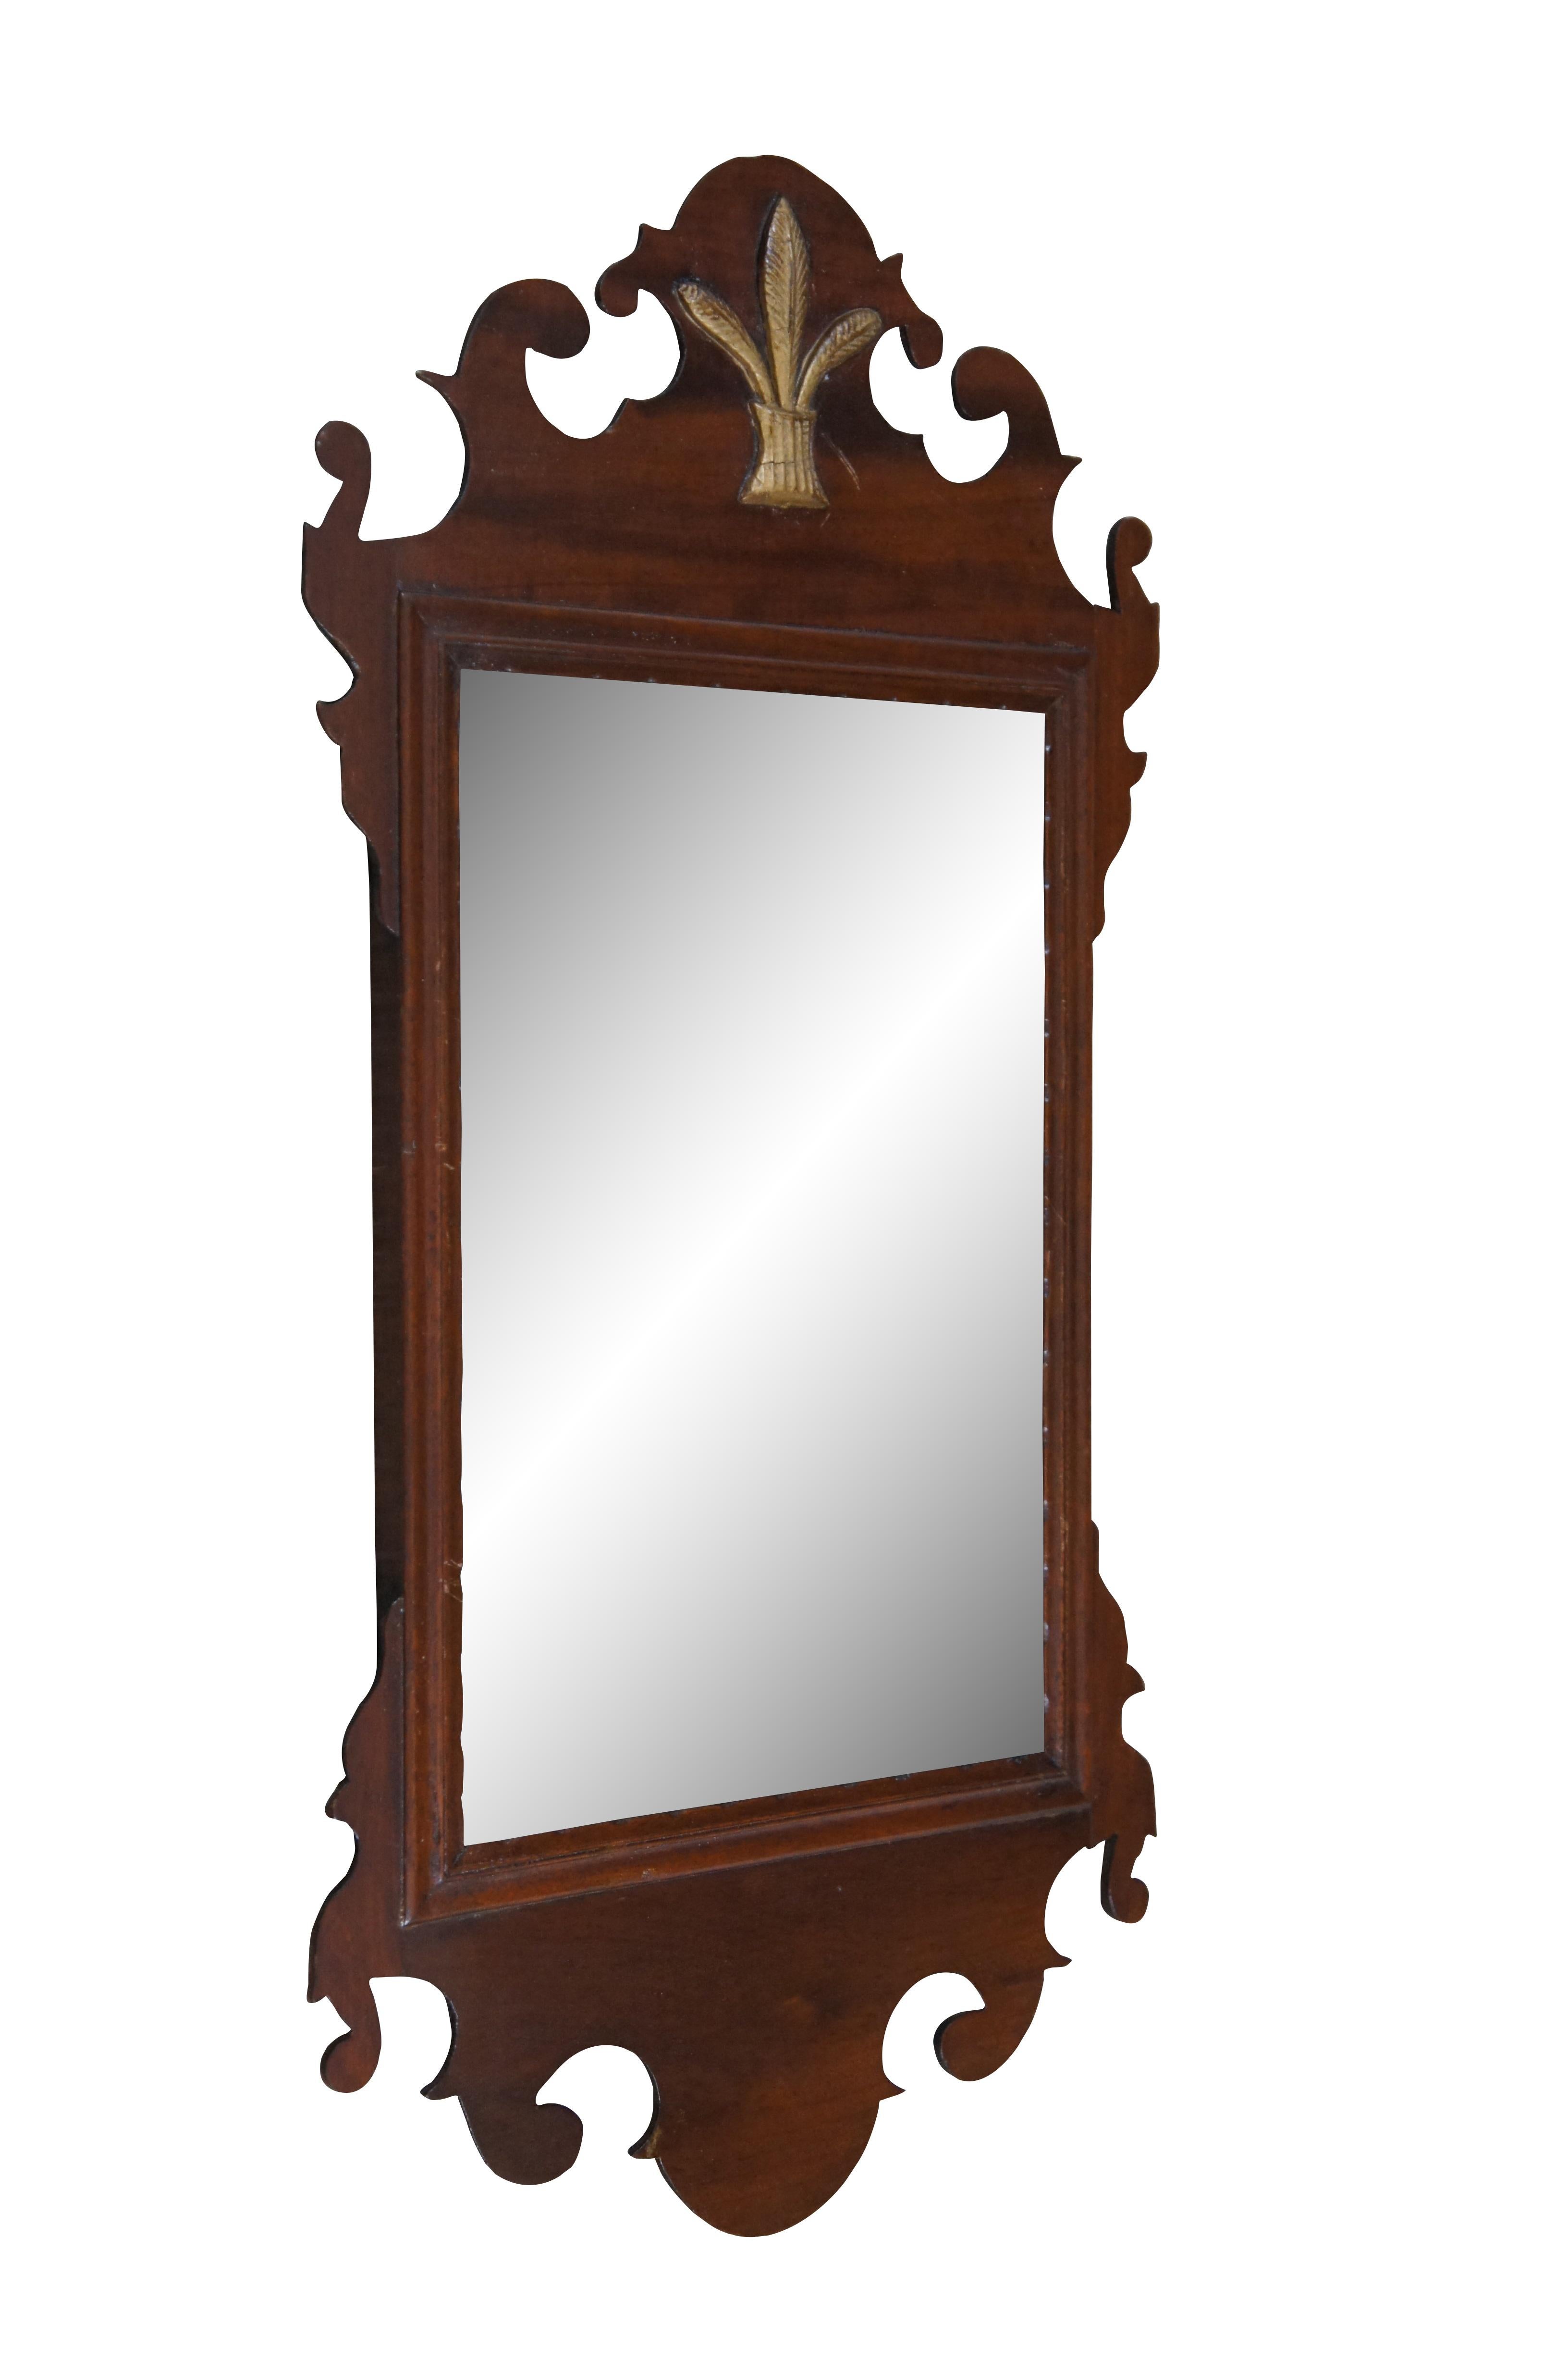 Fédéral Antique Federal Mahogany Feathers Plume Wall Vanity Mirror 26